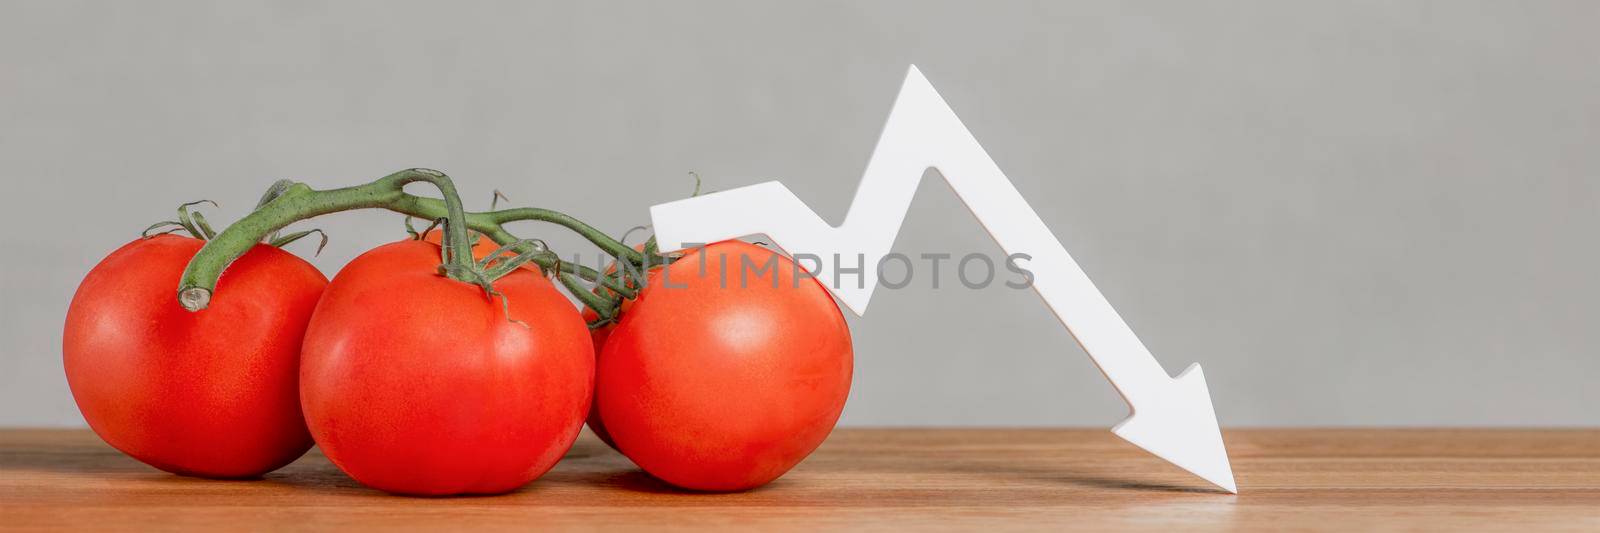 The price of tomatoes and vegetables. Bad vegetable harvest. Fresh red ripe tomatoes with twigs on the table. Graph chart points down. by SERSOL